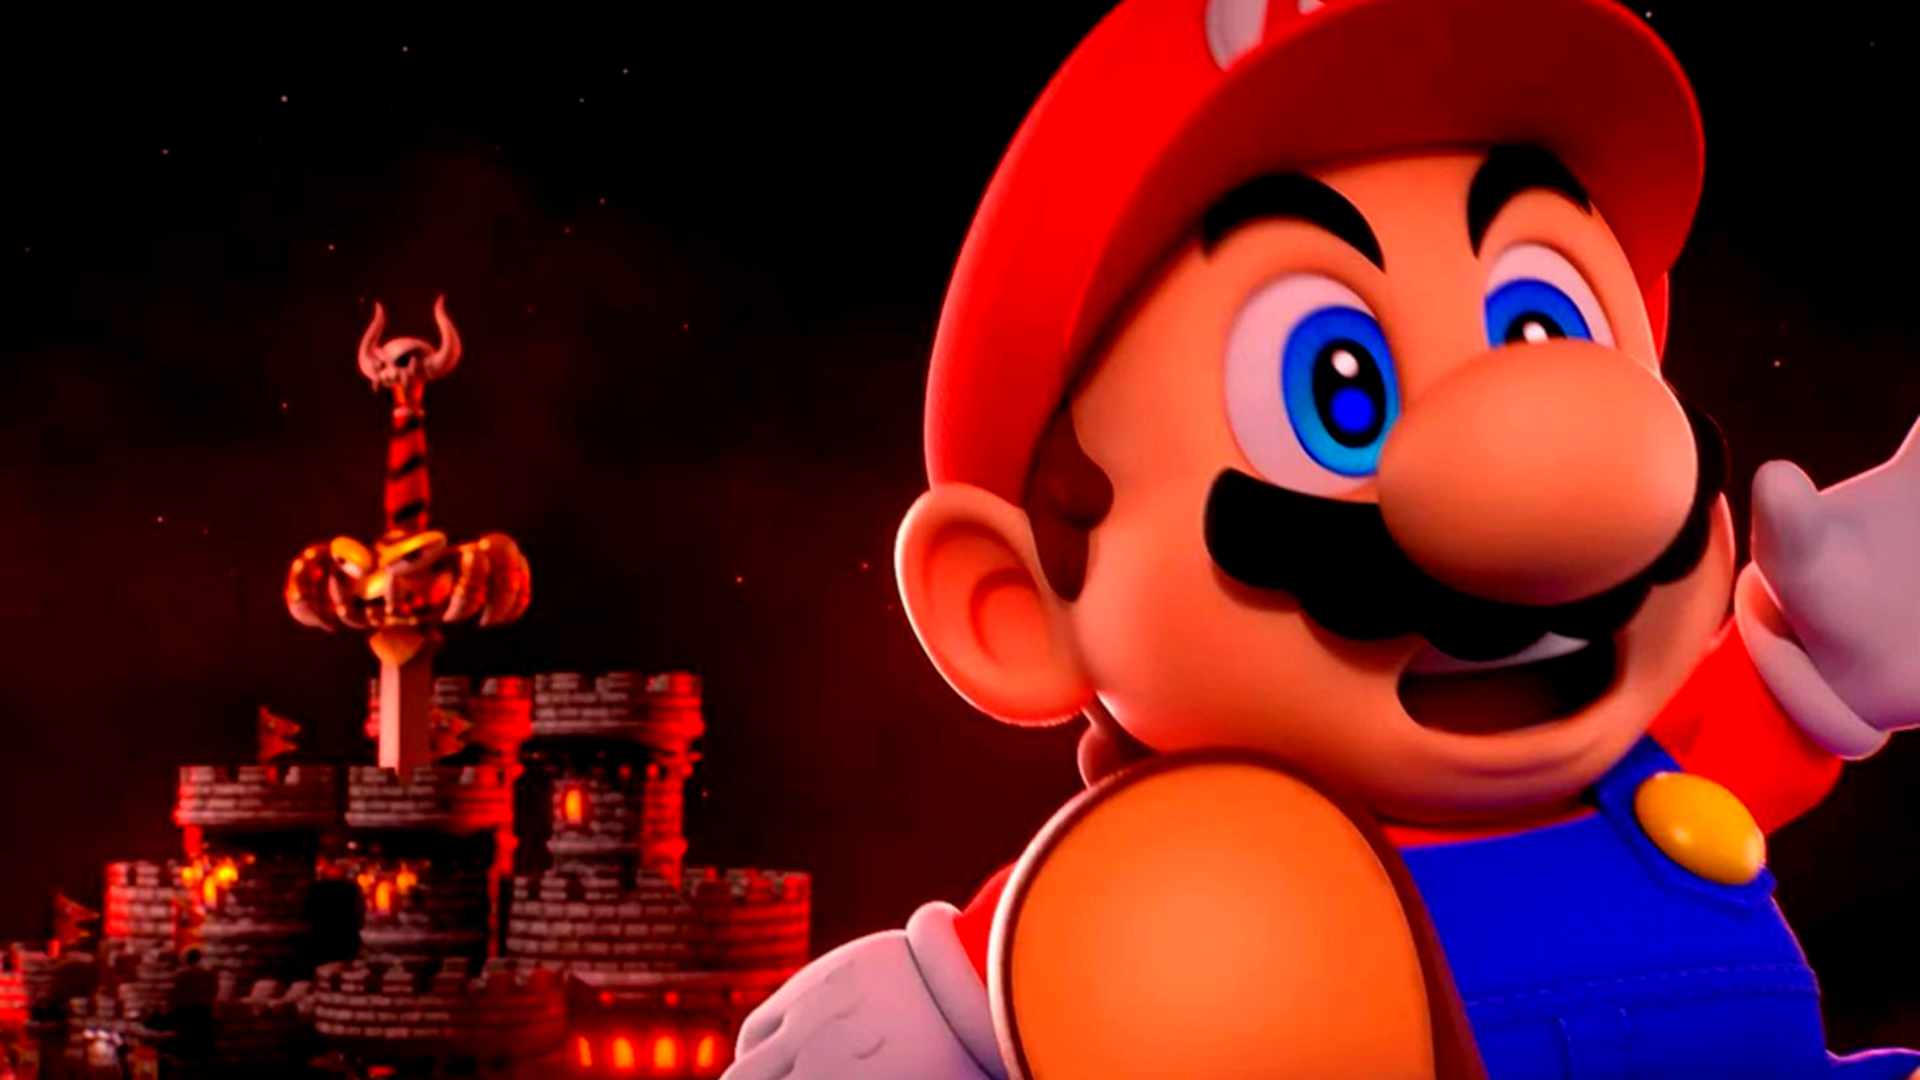 Super Mario RPG for Switch Leaked Ahead of Official Launch